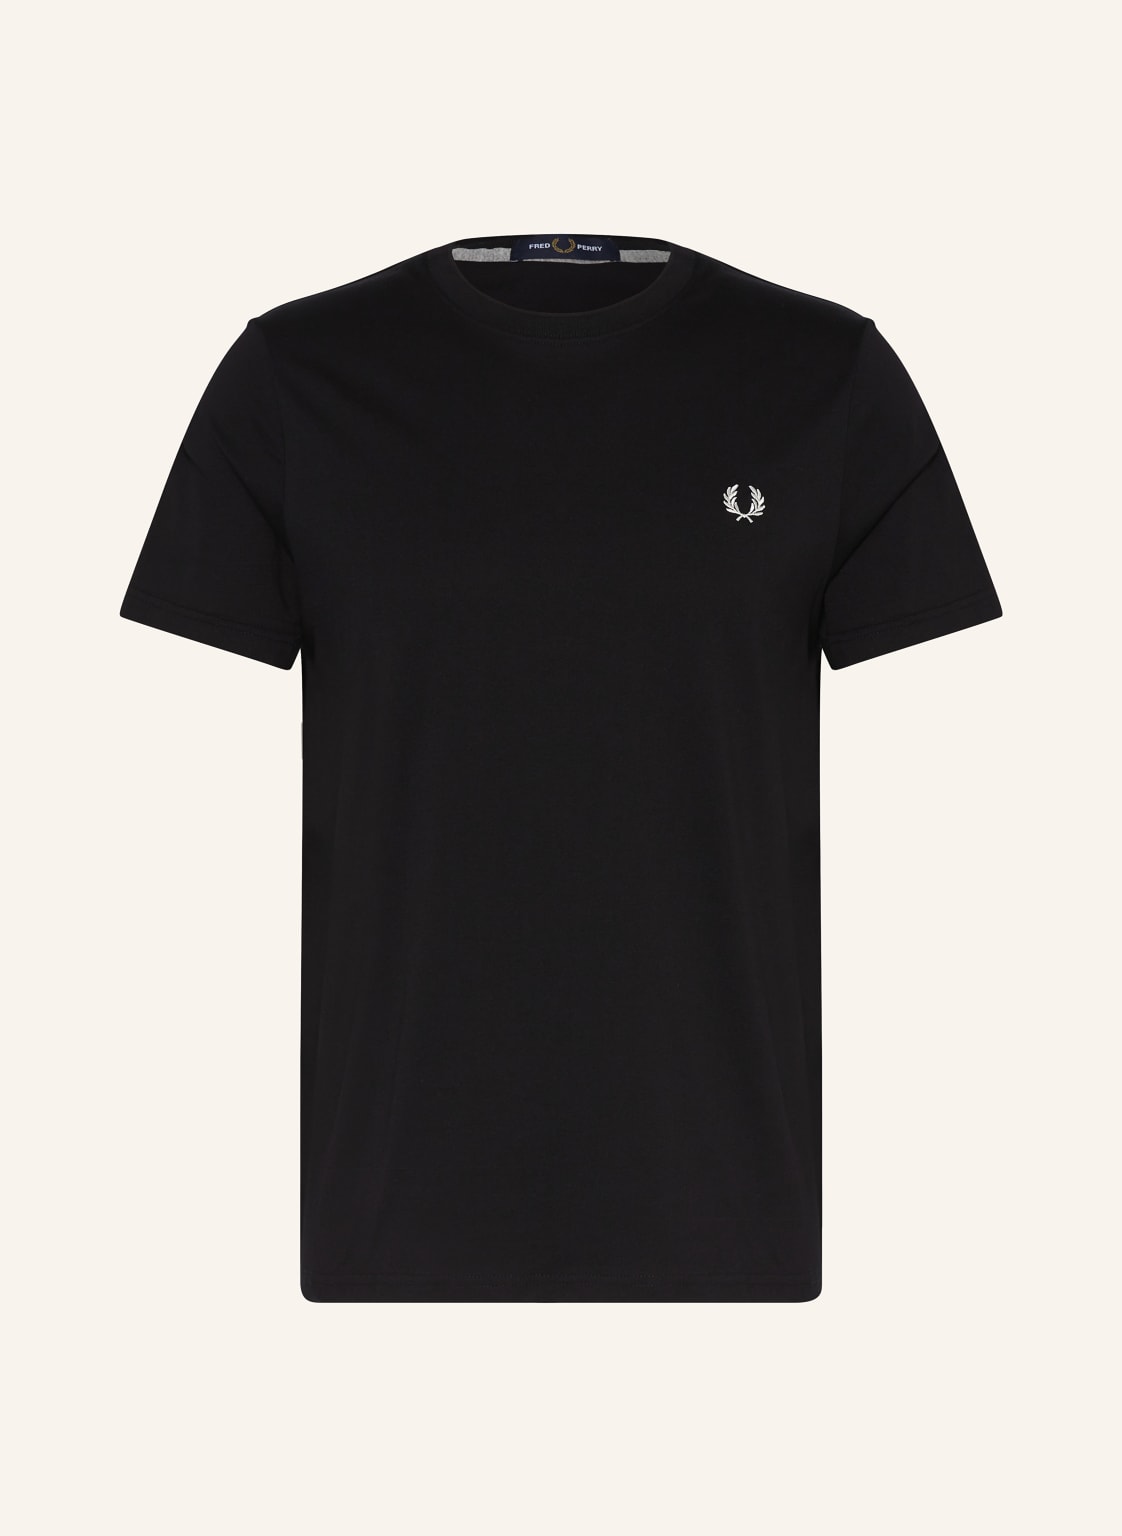 Fred Perry T-Shirt schwarz von Fred Perry